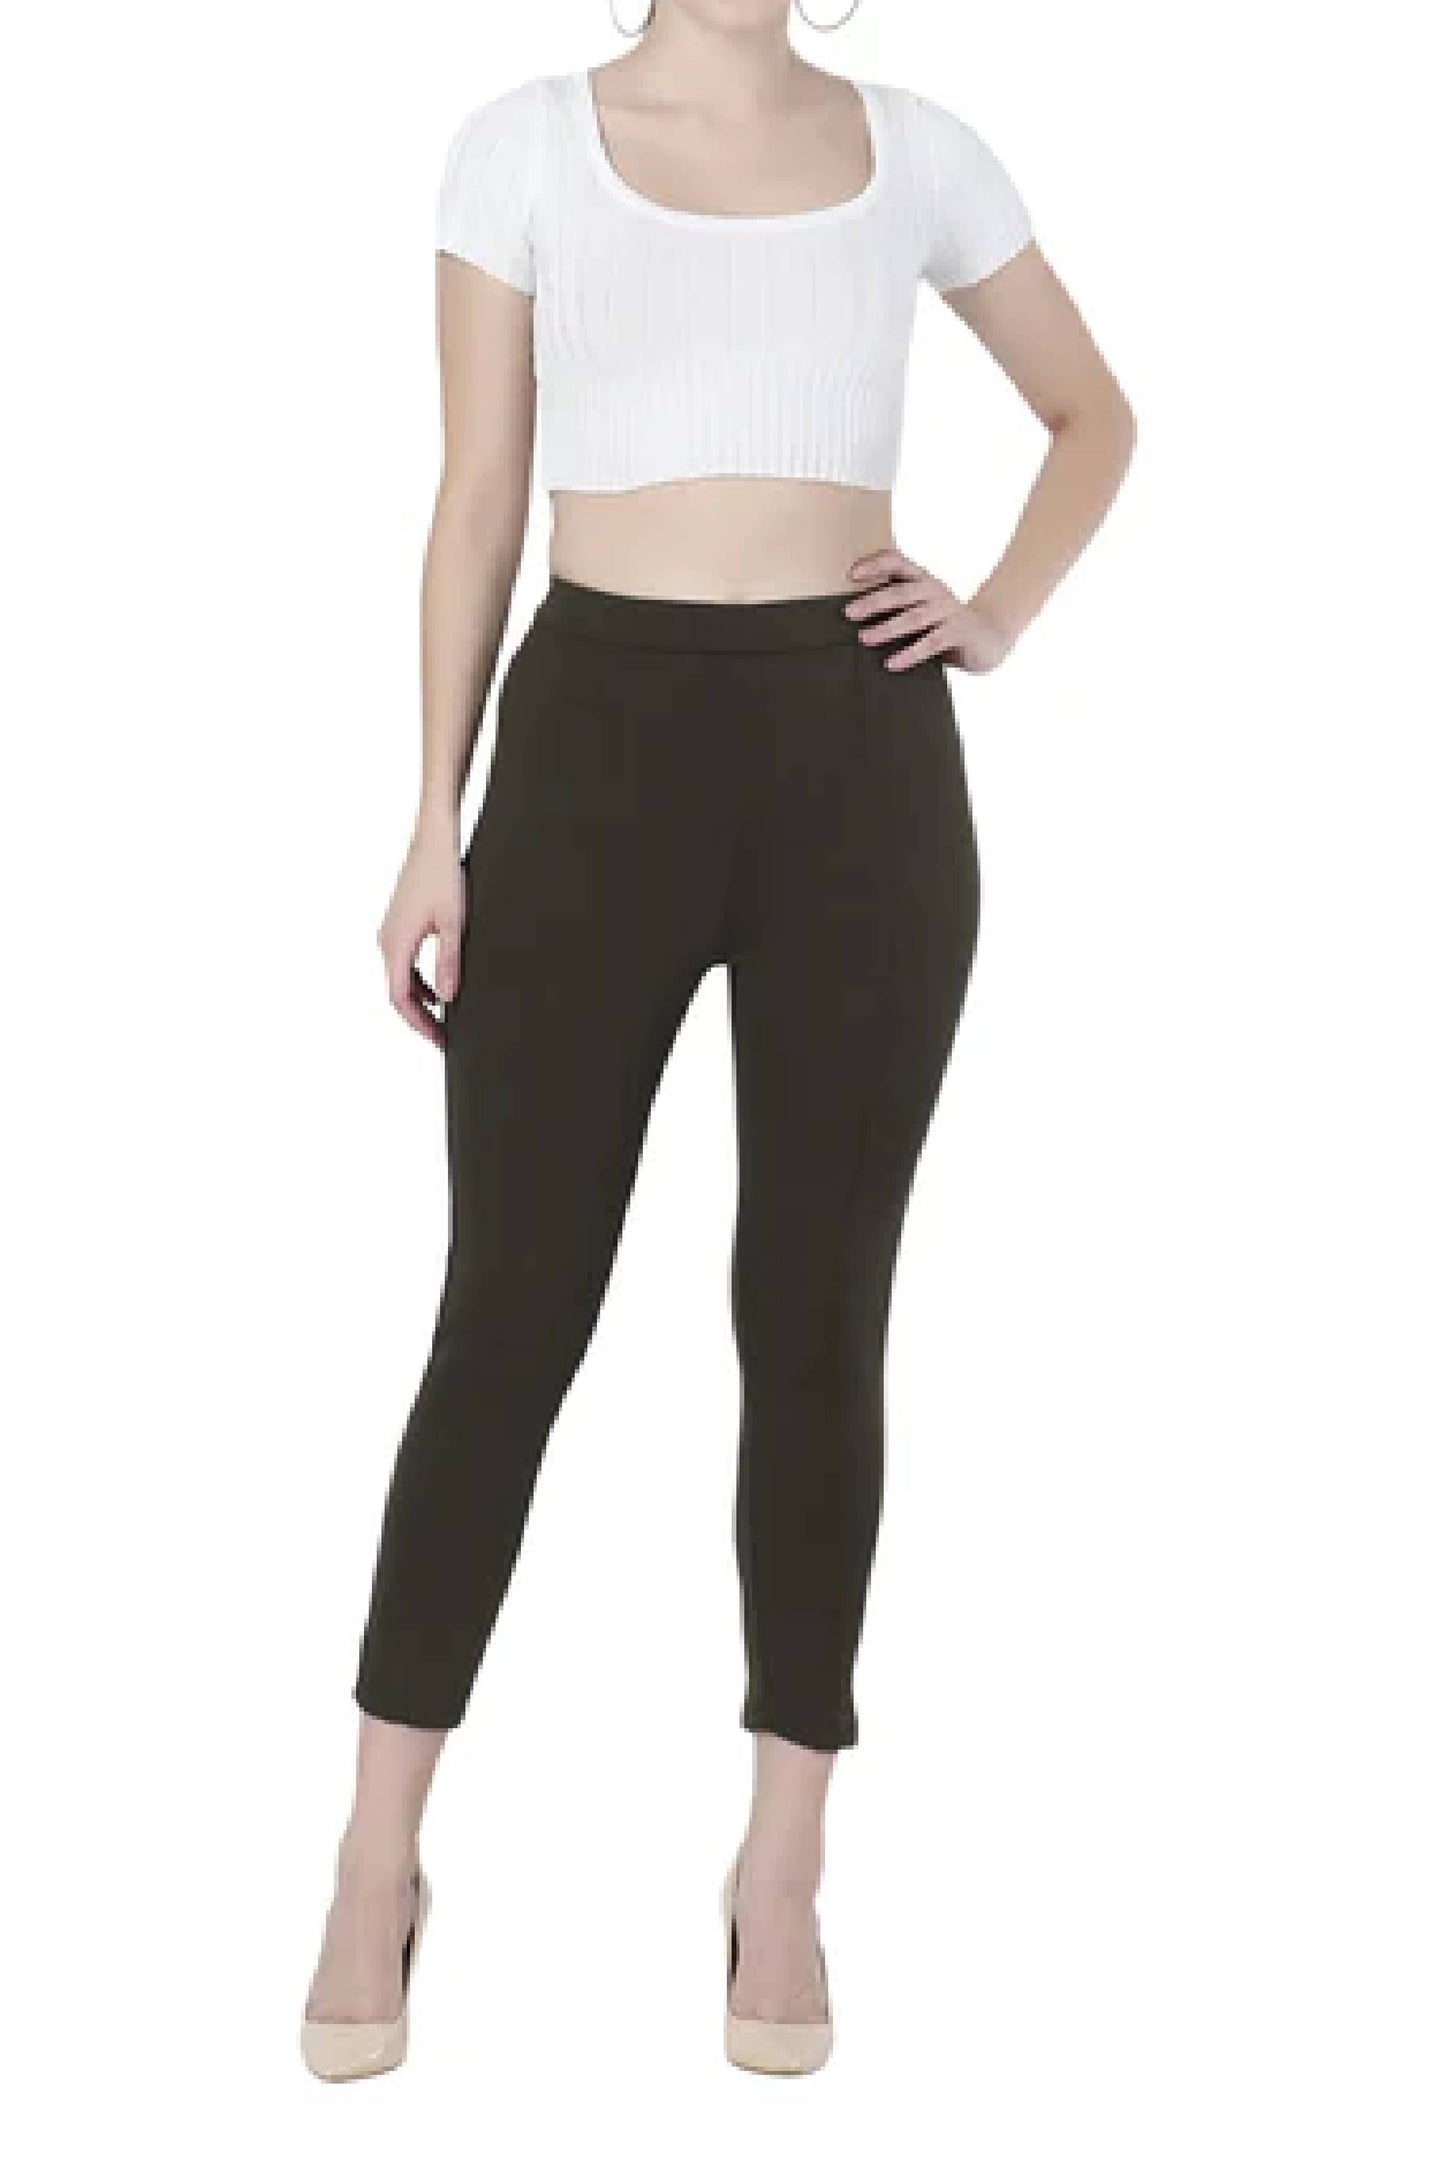 Stretchable Jeggings For Women Wear